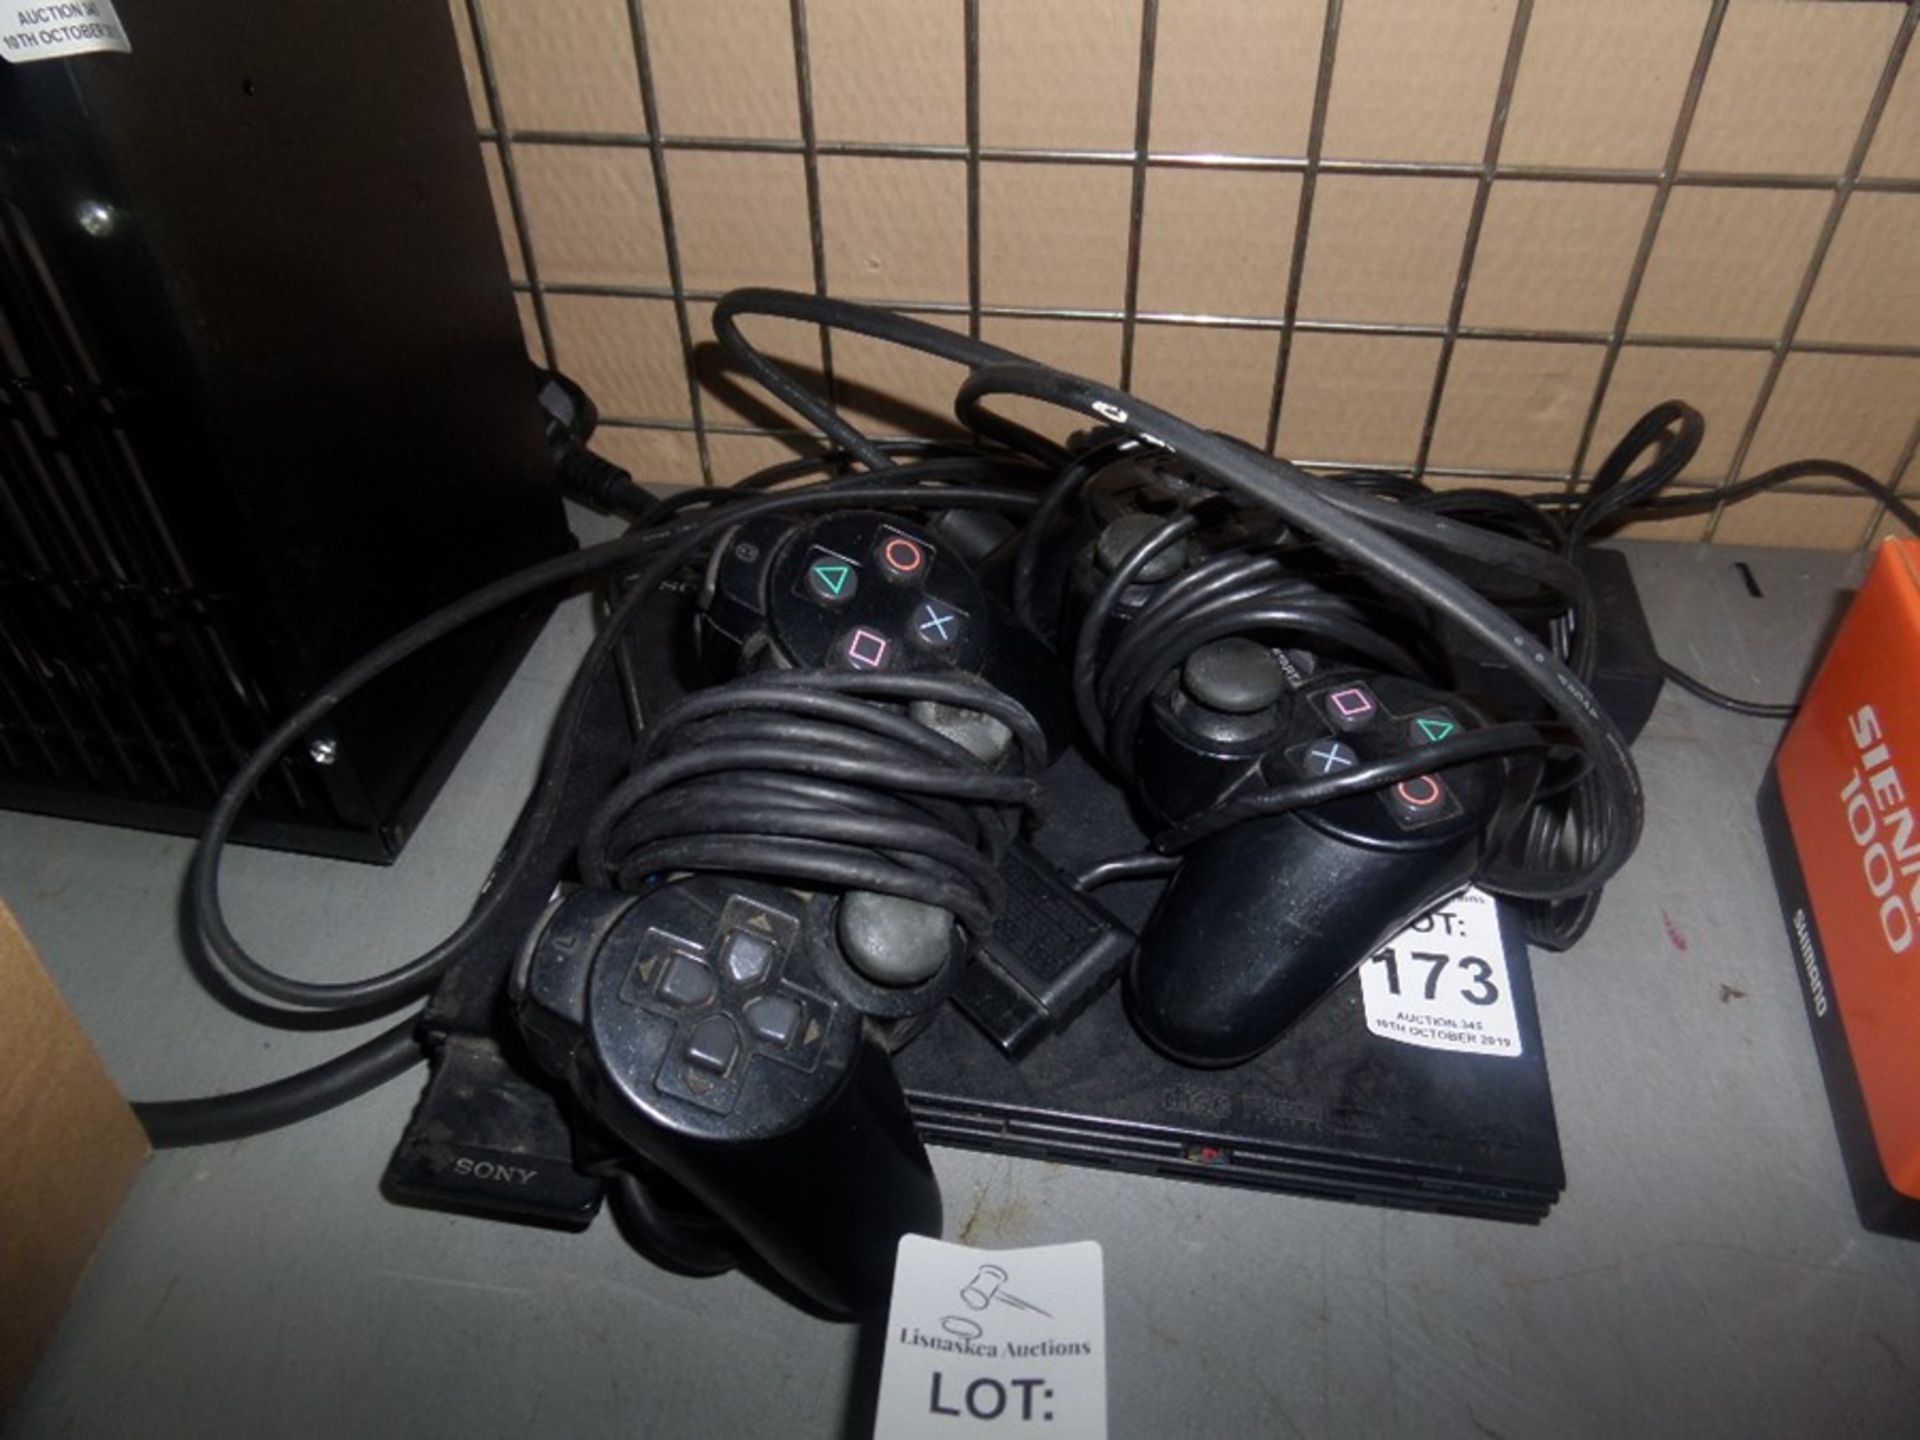 PS2 PLAYSTATION WITH CONTROLLERS